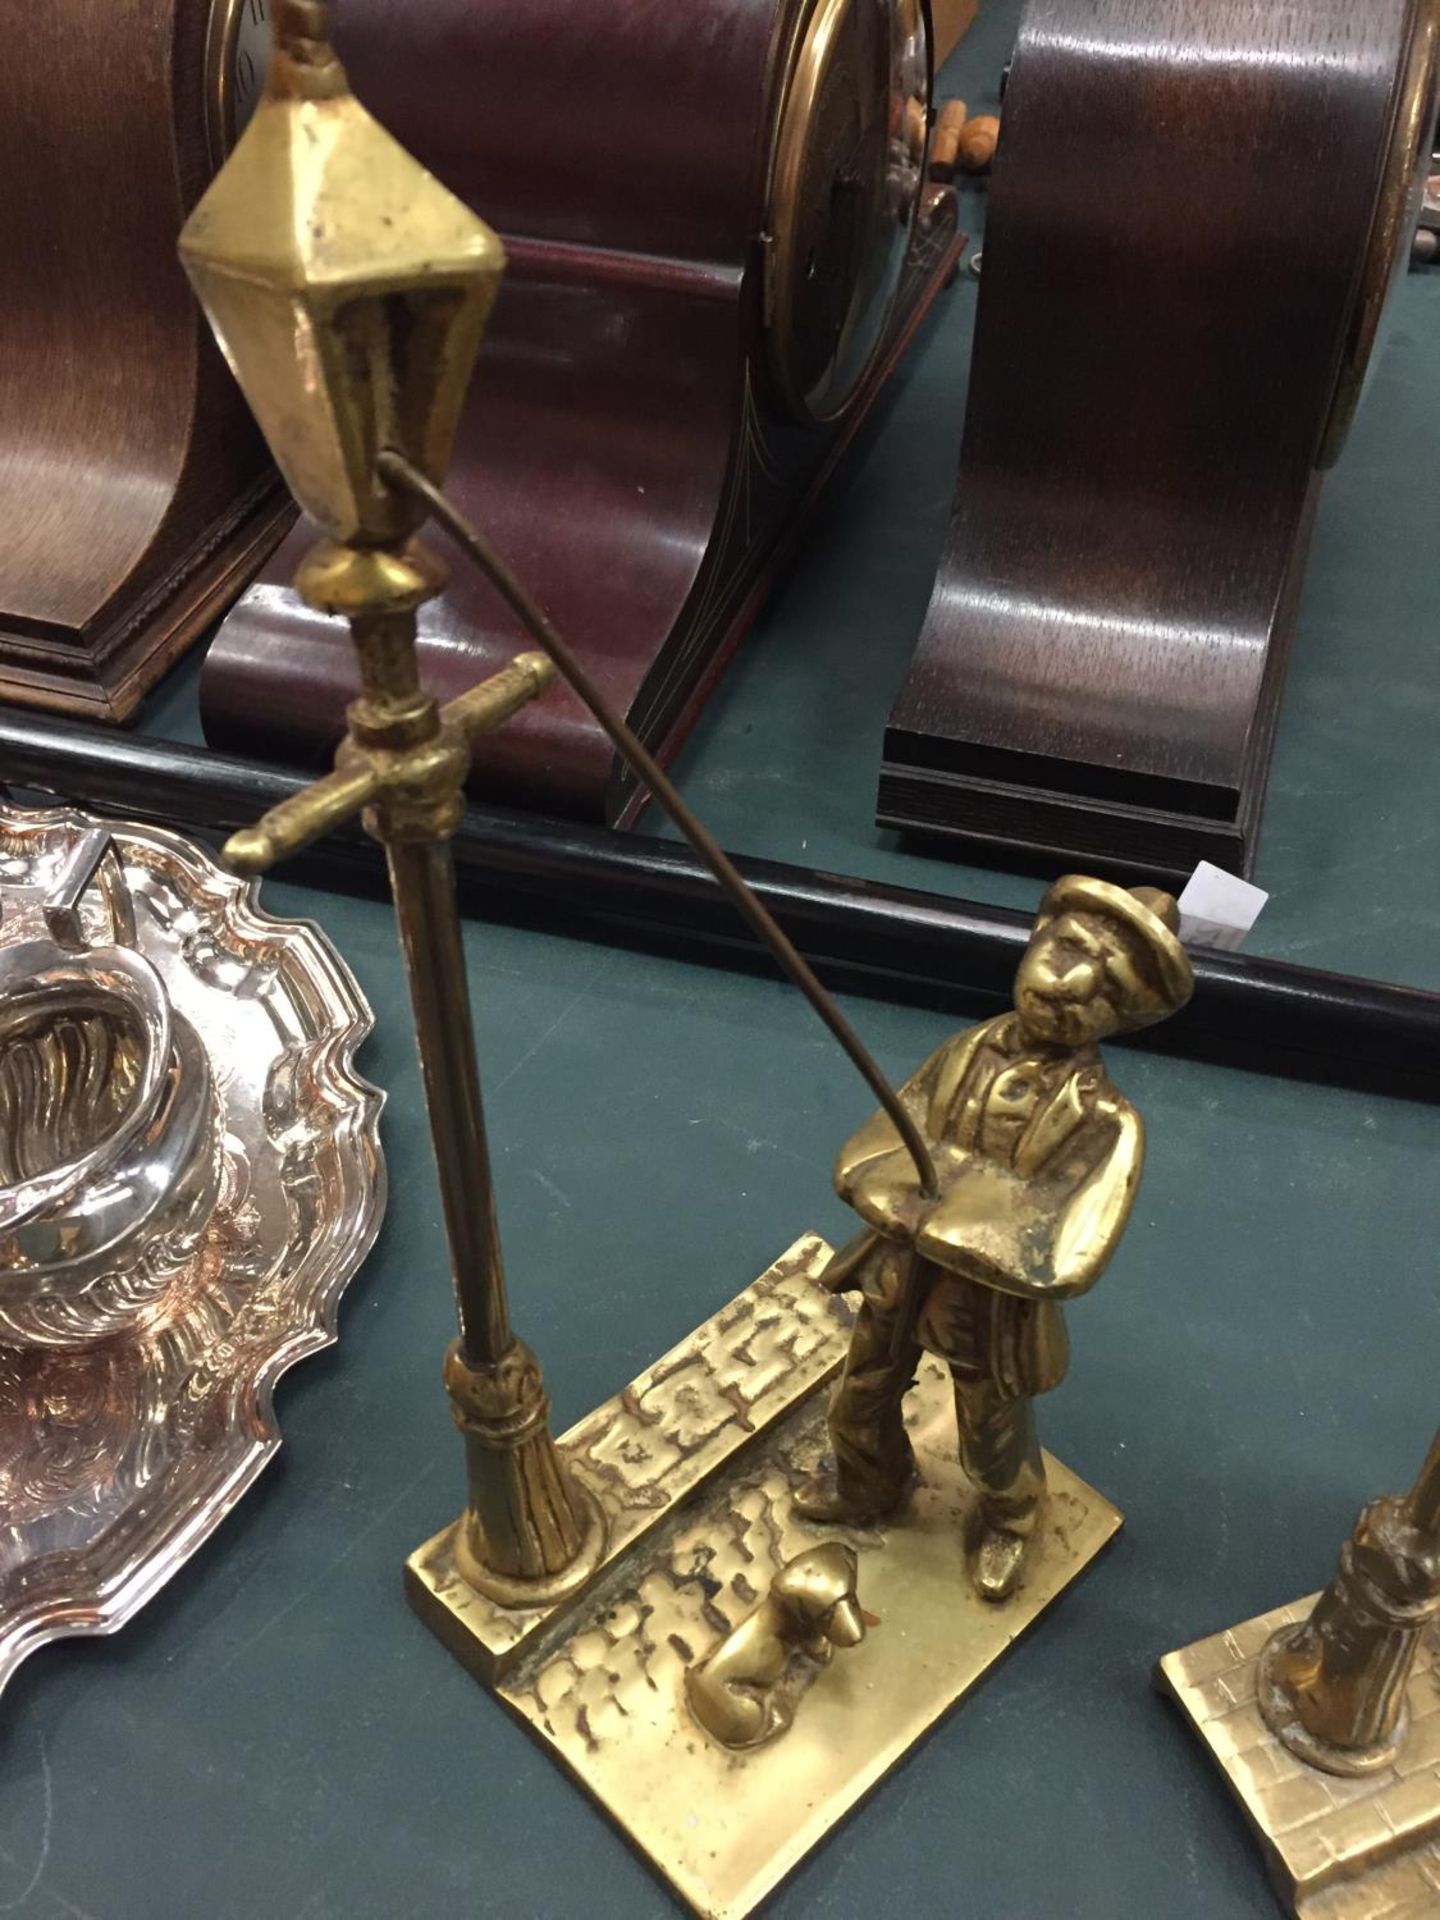 TWO BRASS FIGURES OF STREETLAMP LIGHTERS WITH DOGS - Image 3 of 3